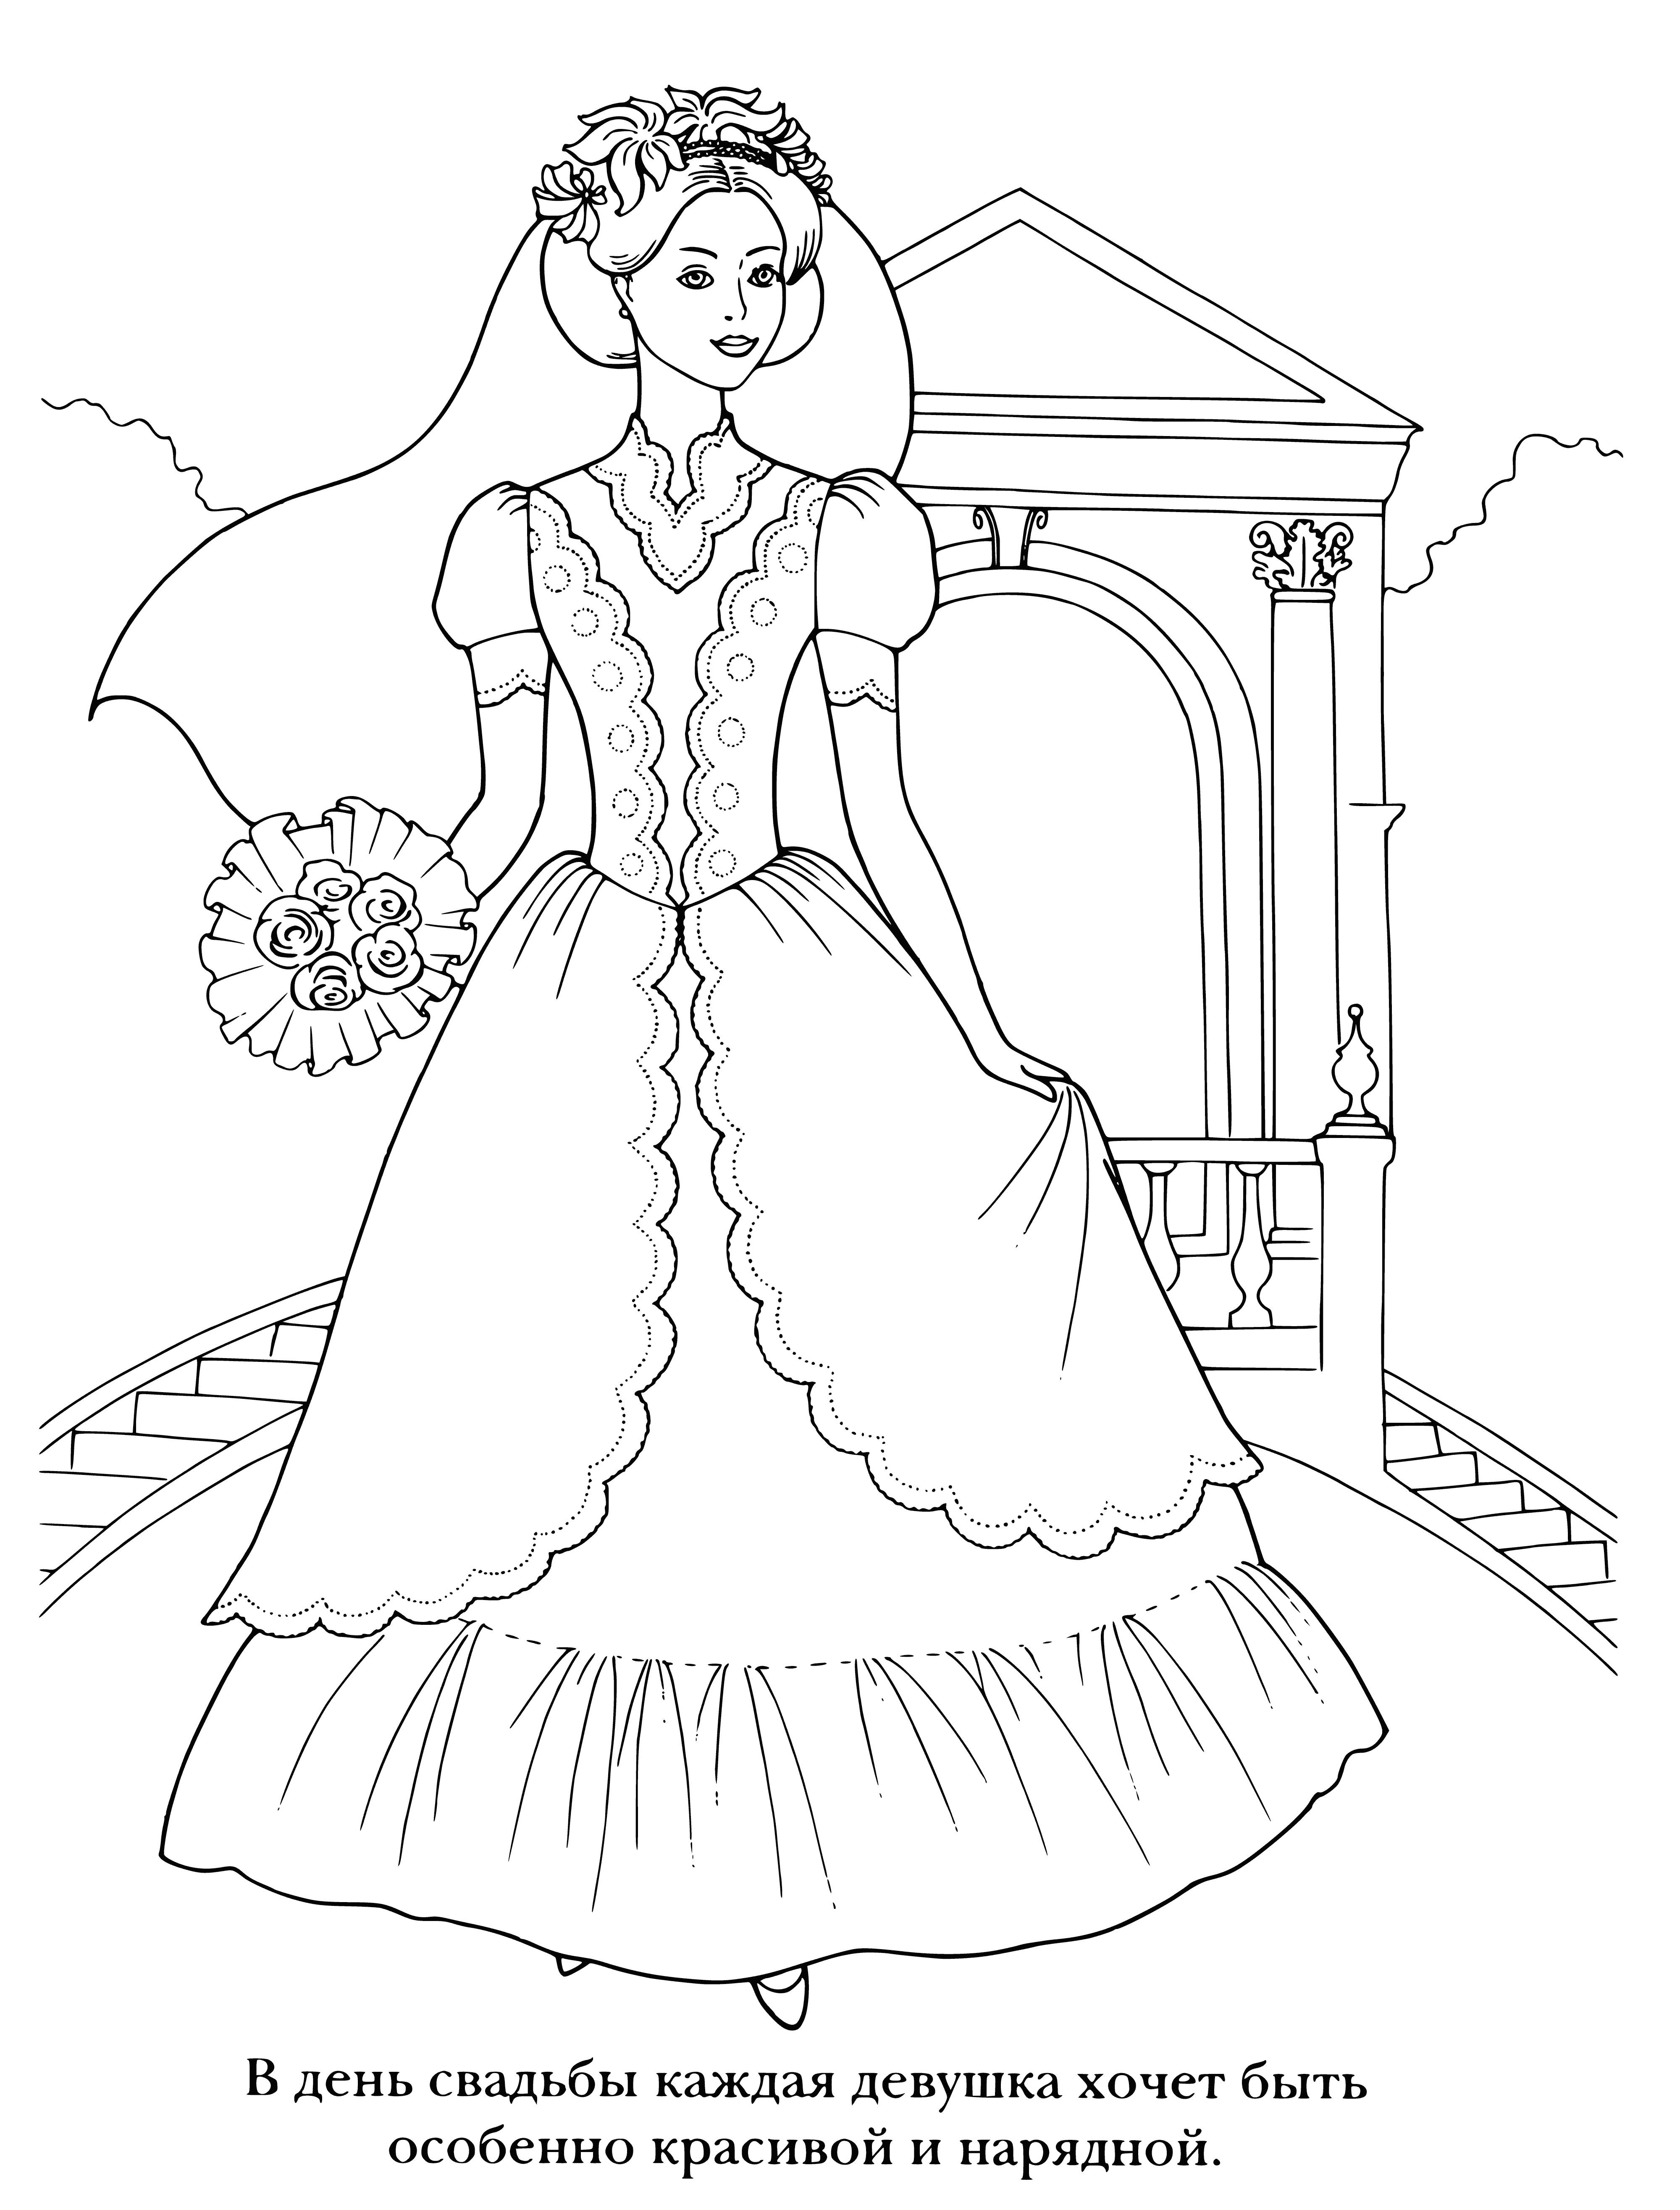 coloring page: Bride has a beautiful bouquet of mixed colors & types of flowers. She looks happy & excited to hold it.